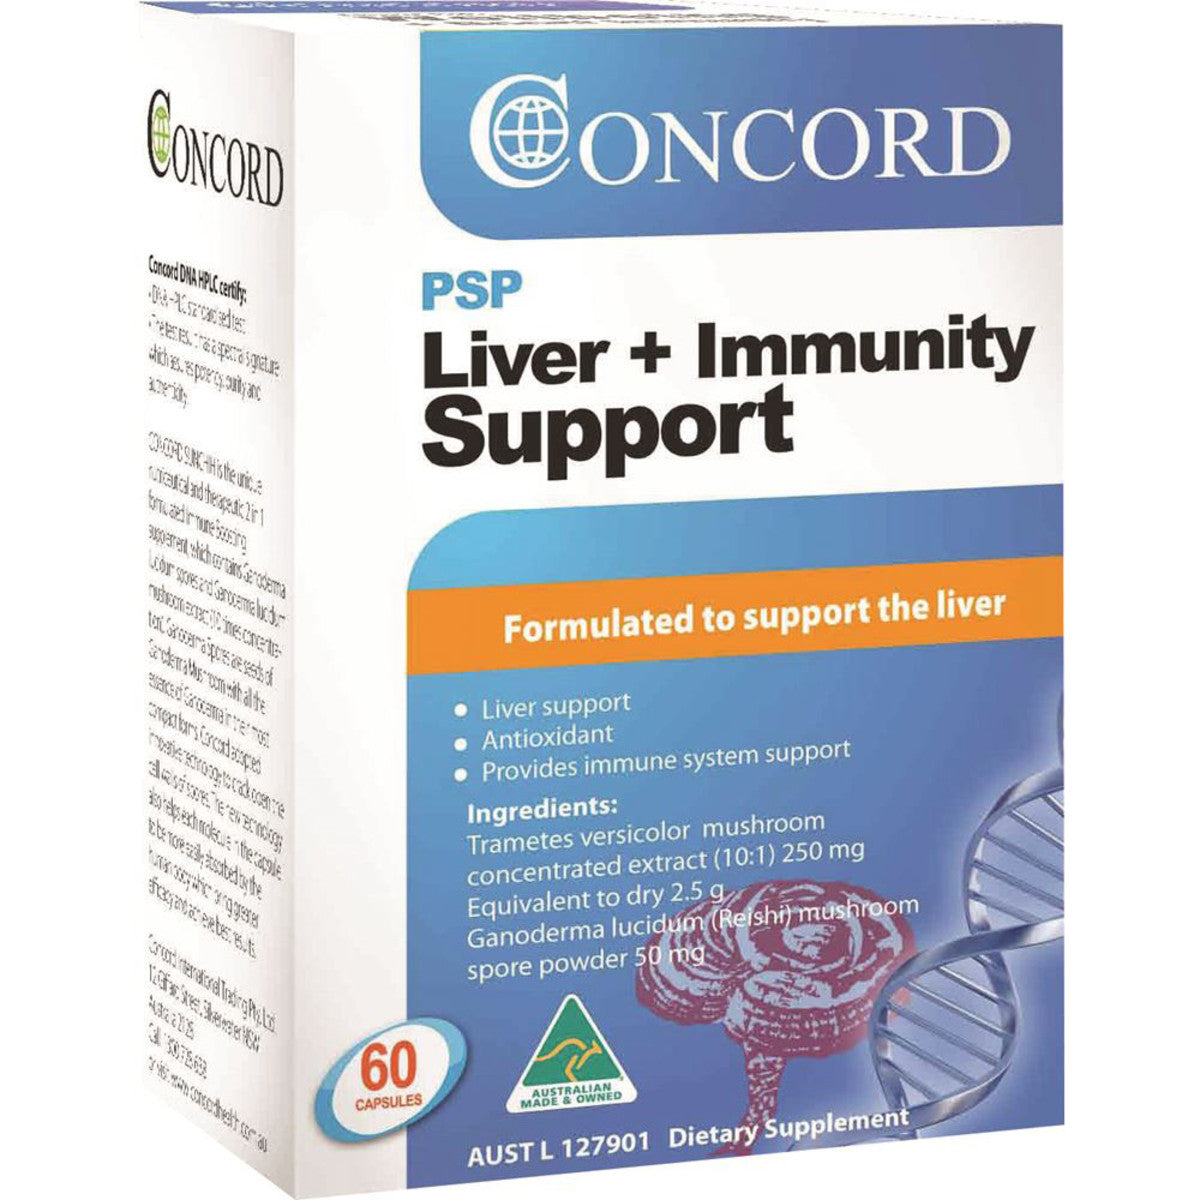 Concord - PSP Liver Plus Immunity Support